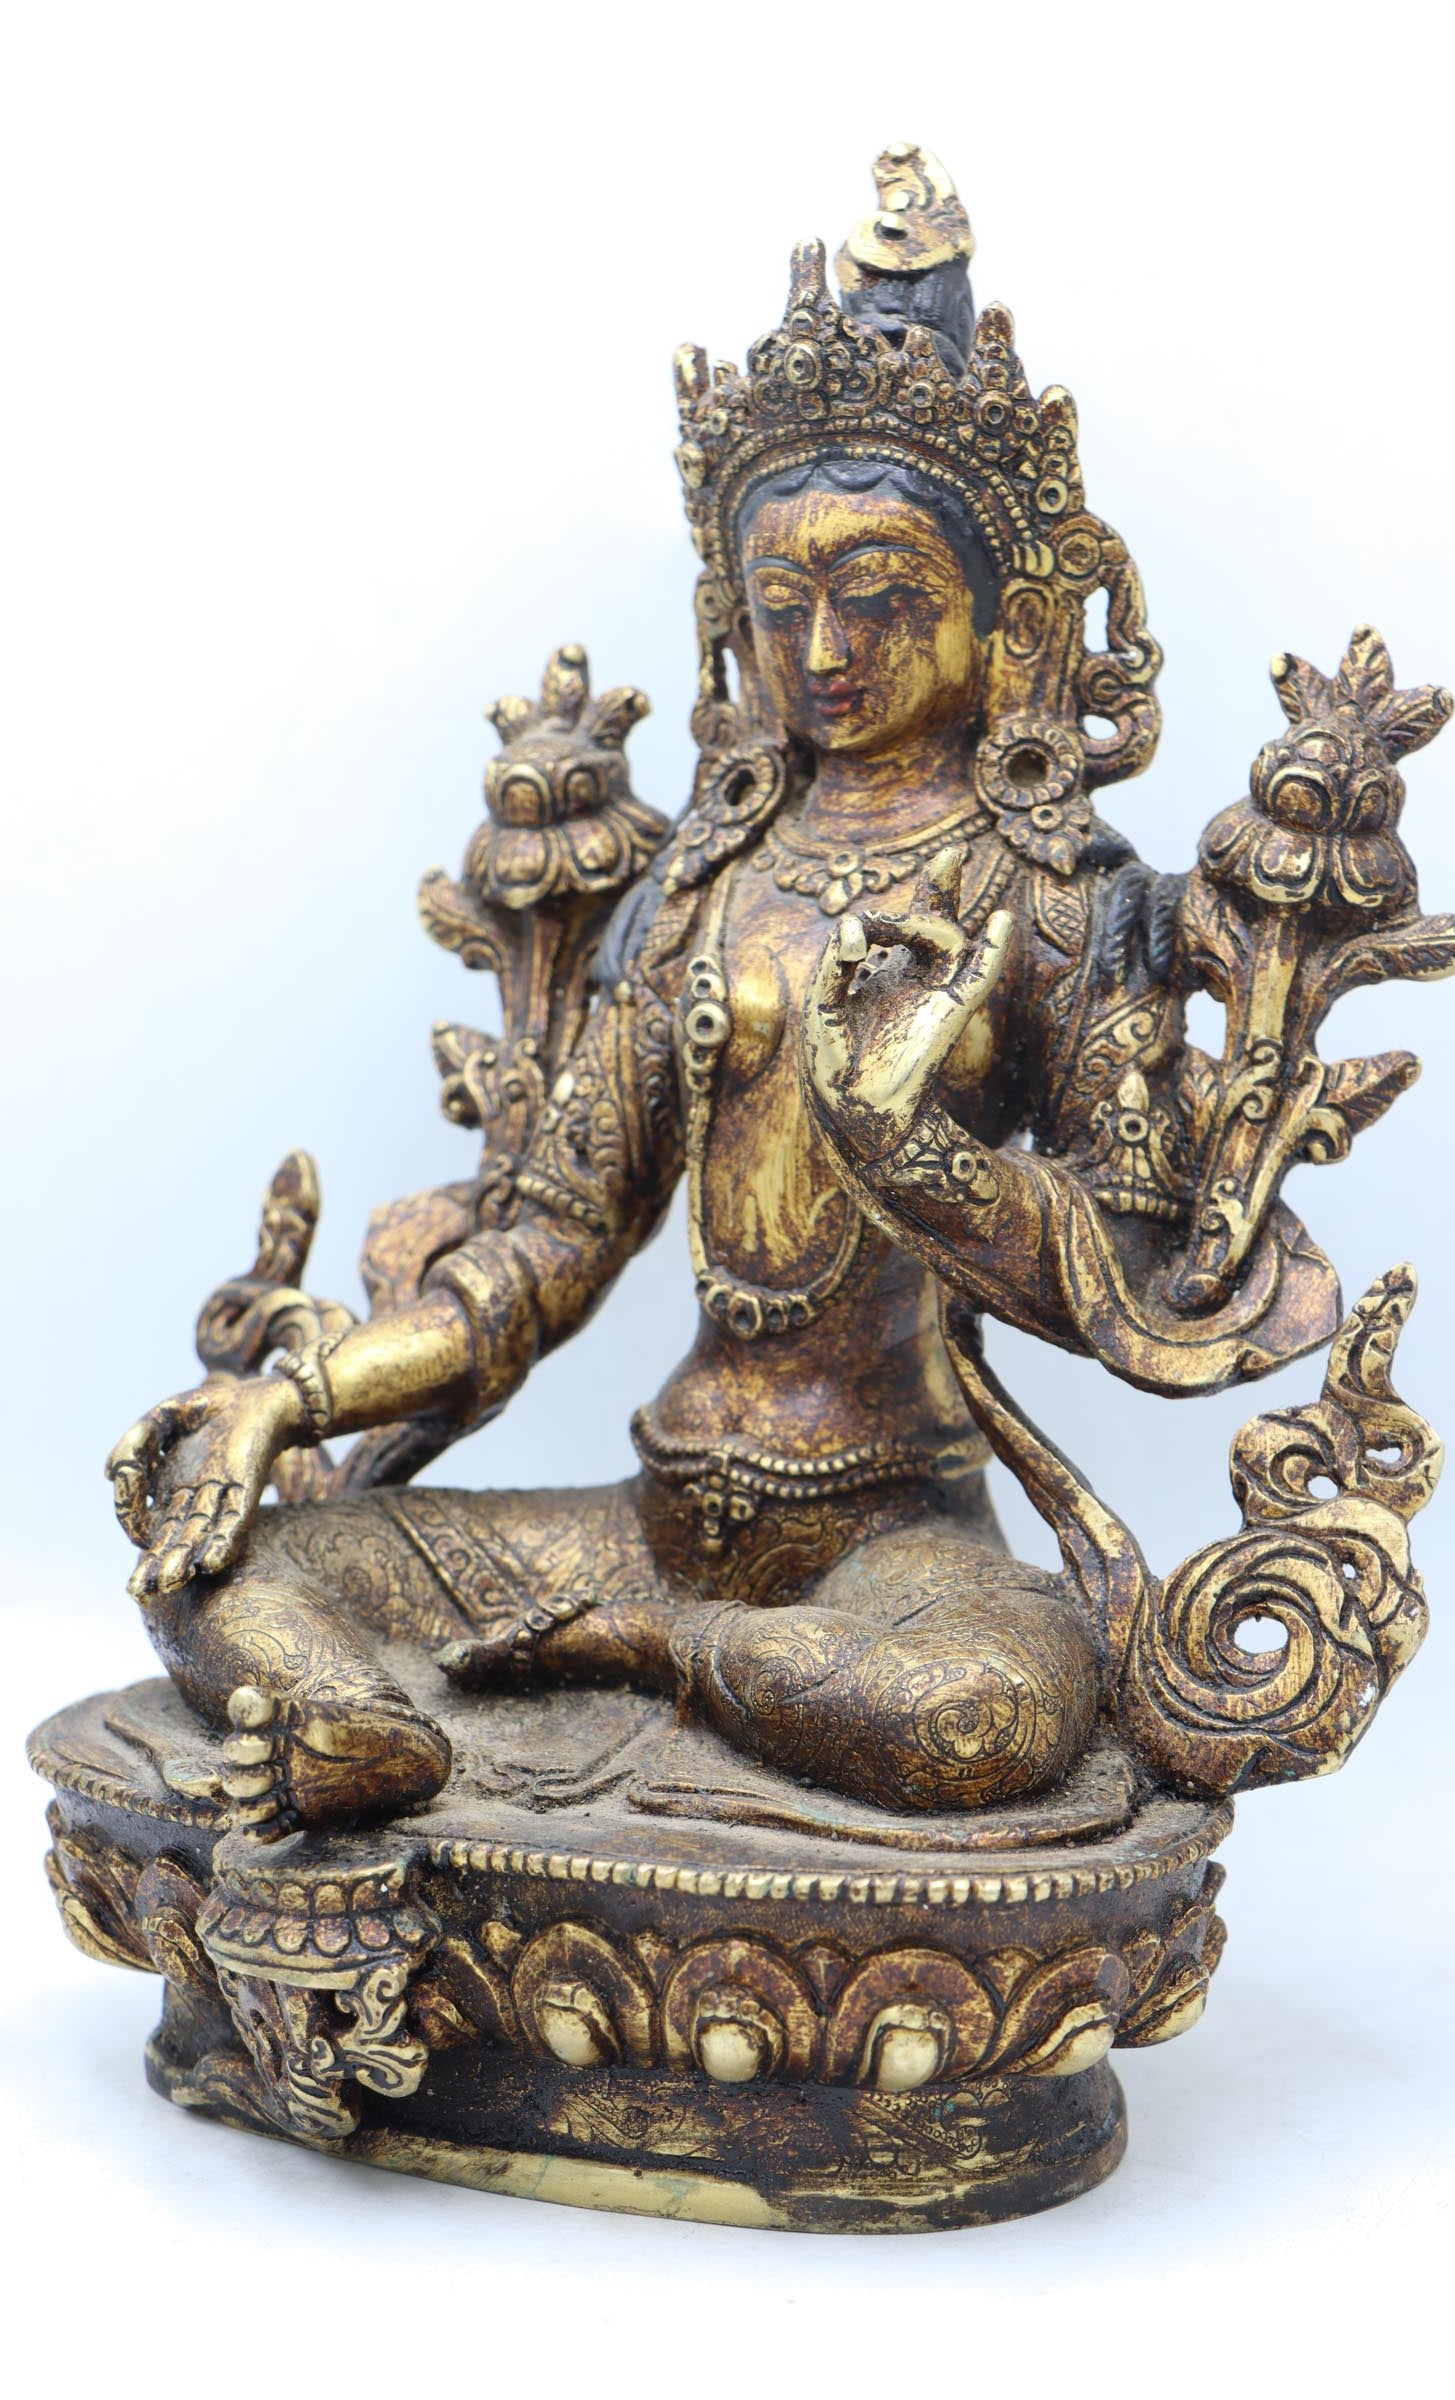 Green Tara Statue for healing, and freedom from unease and obstructions.